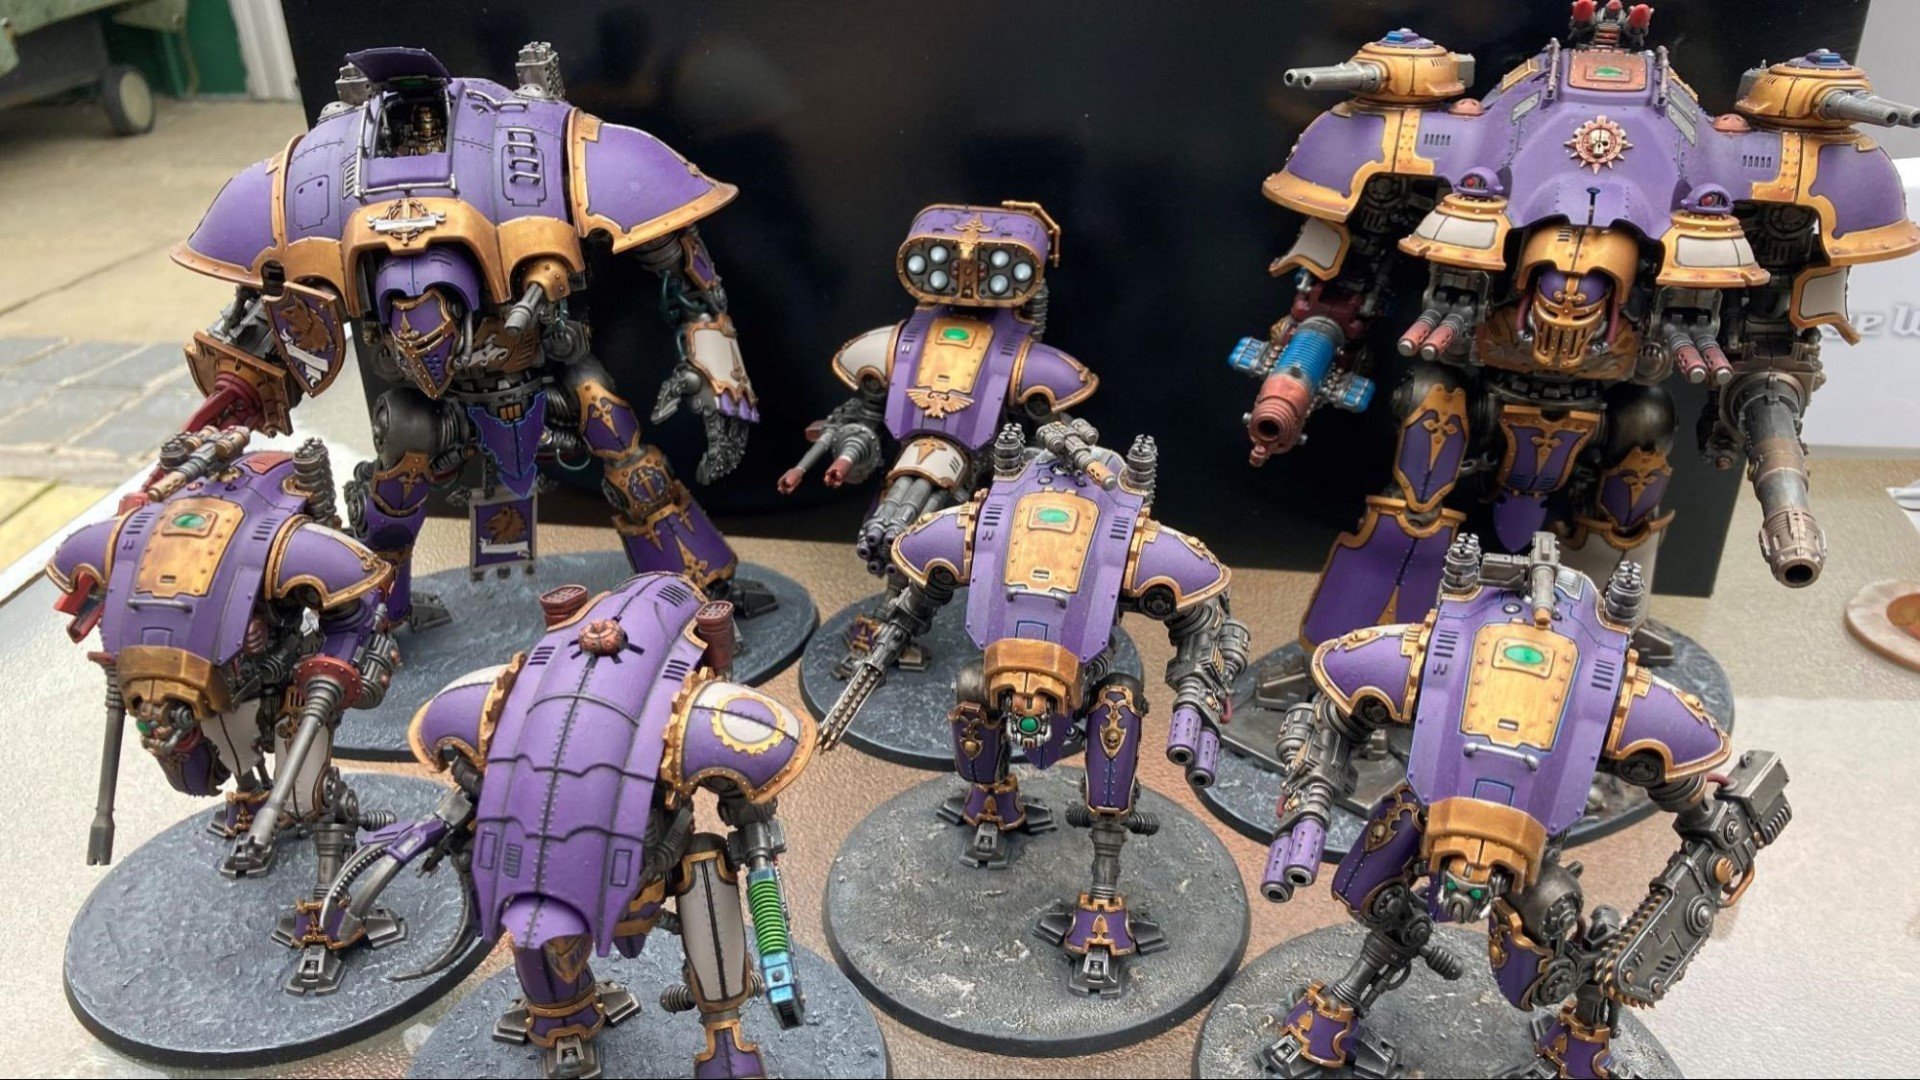 Warhammer 40k Imperial Knights army guide - Photo provided to the author by Alan Bailey showing an Imperial Knight lance painted in purple and gold